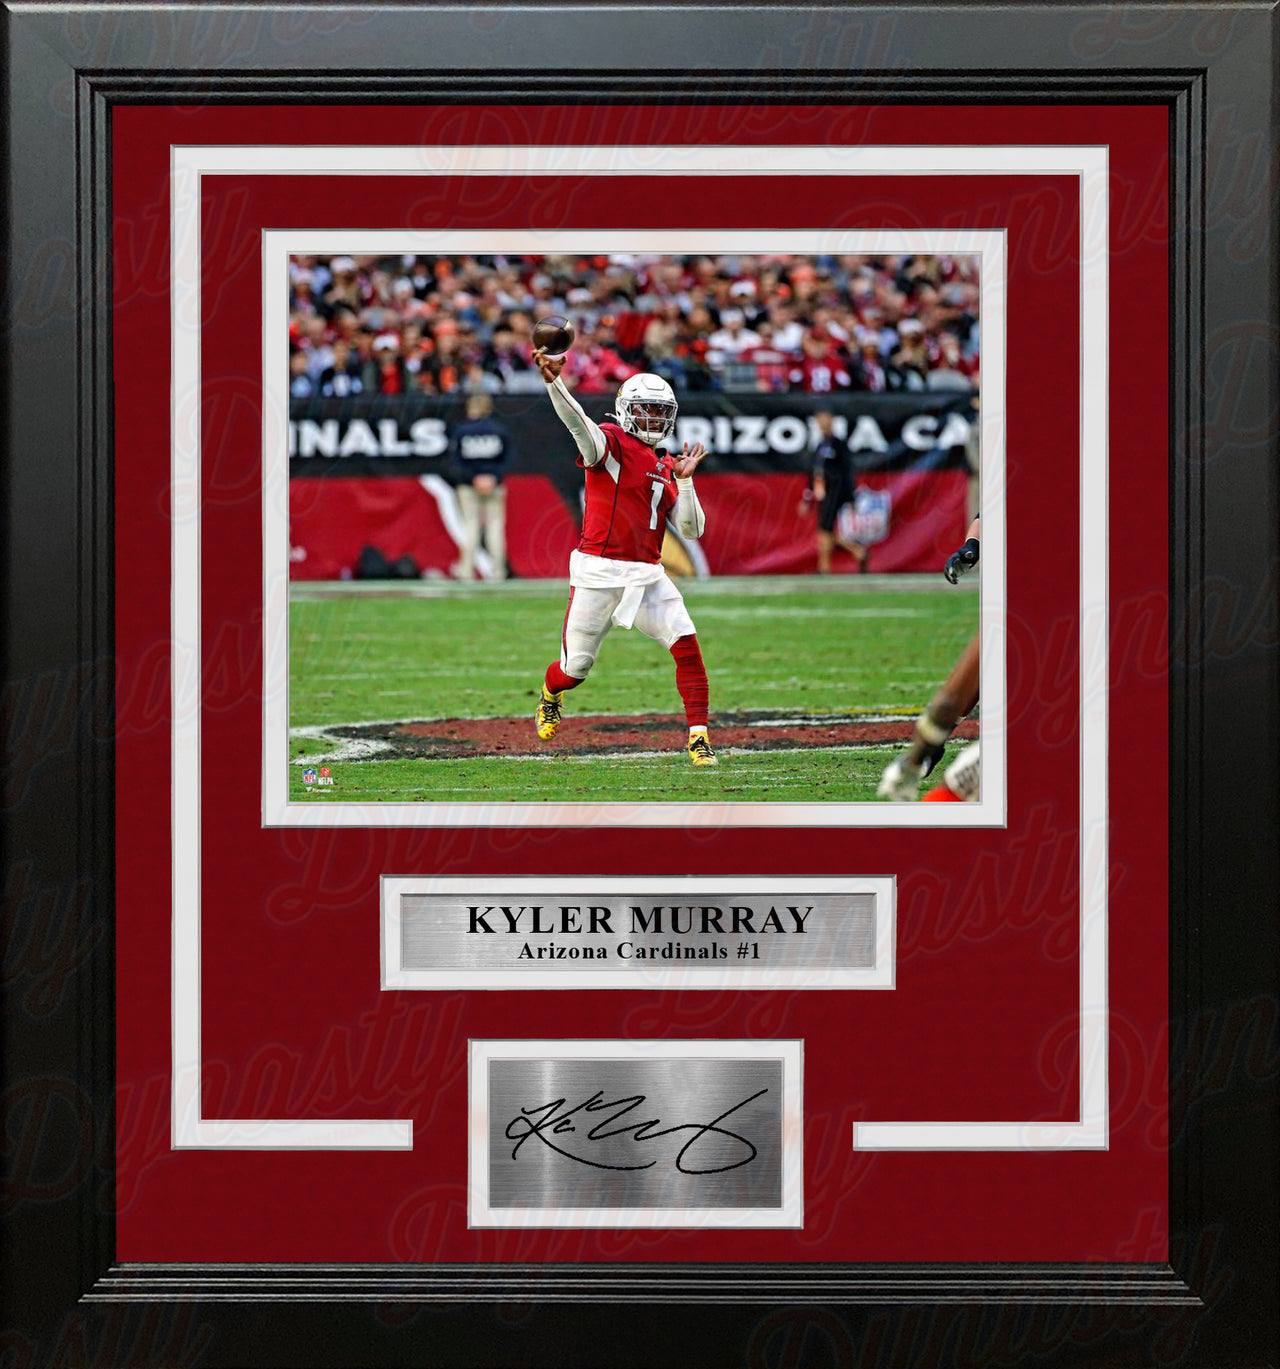 Kyler Murray in Action Arizona Cardinals 8" x 10" Framed Football Photo with Engraved Autograph - Dynasty Sports & Framing 